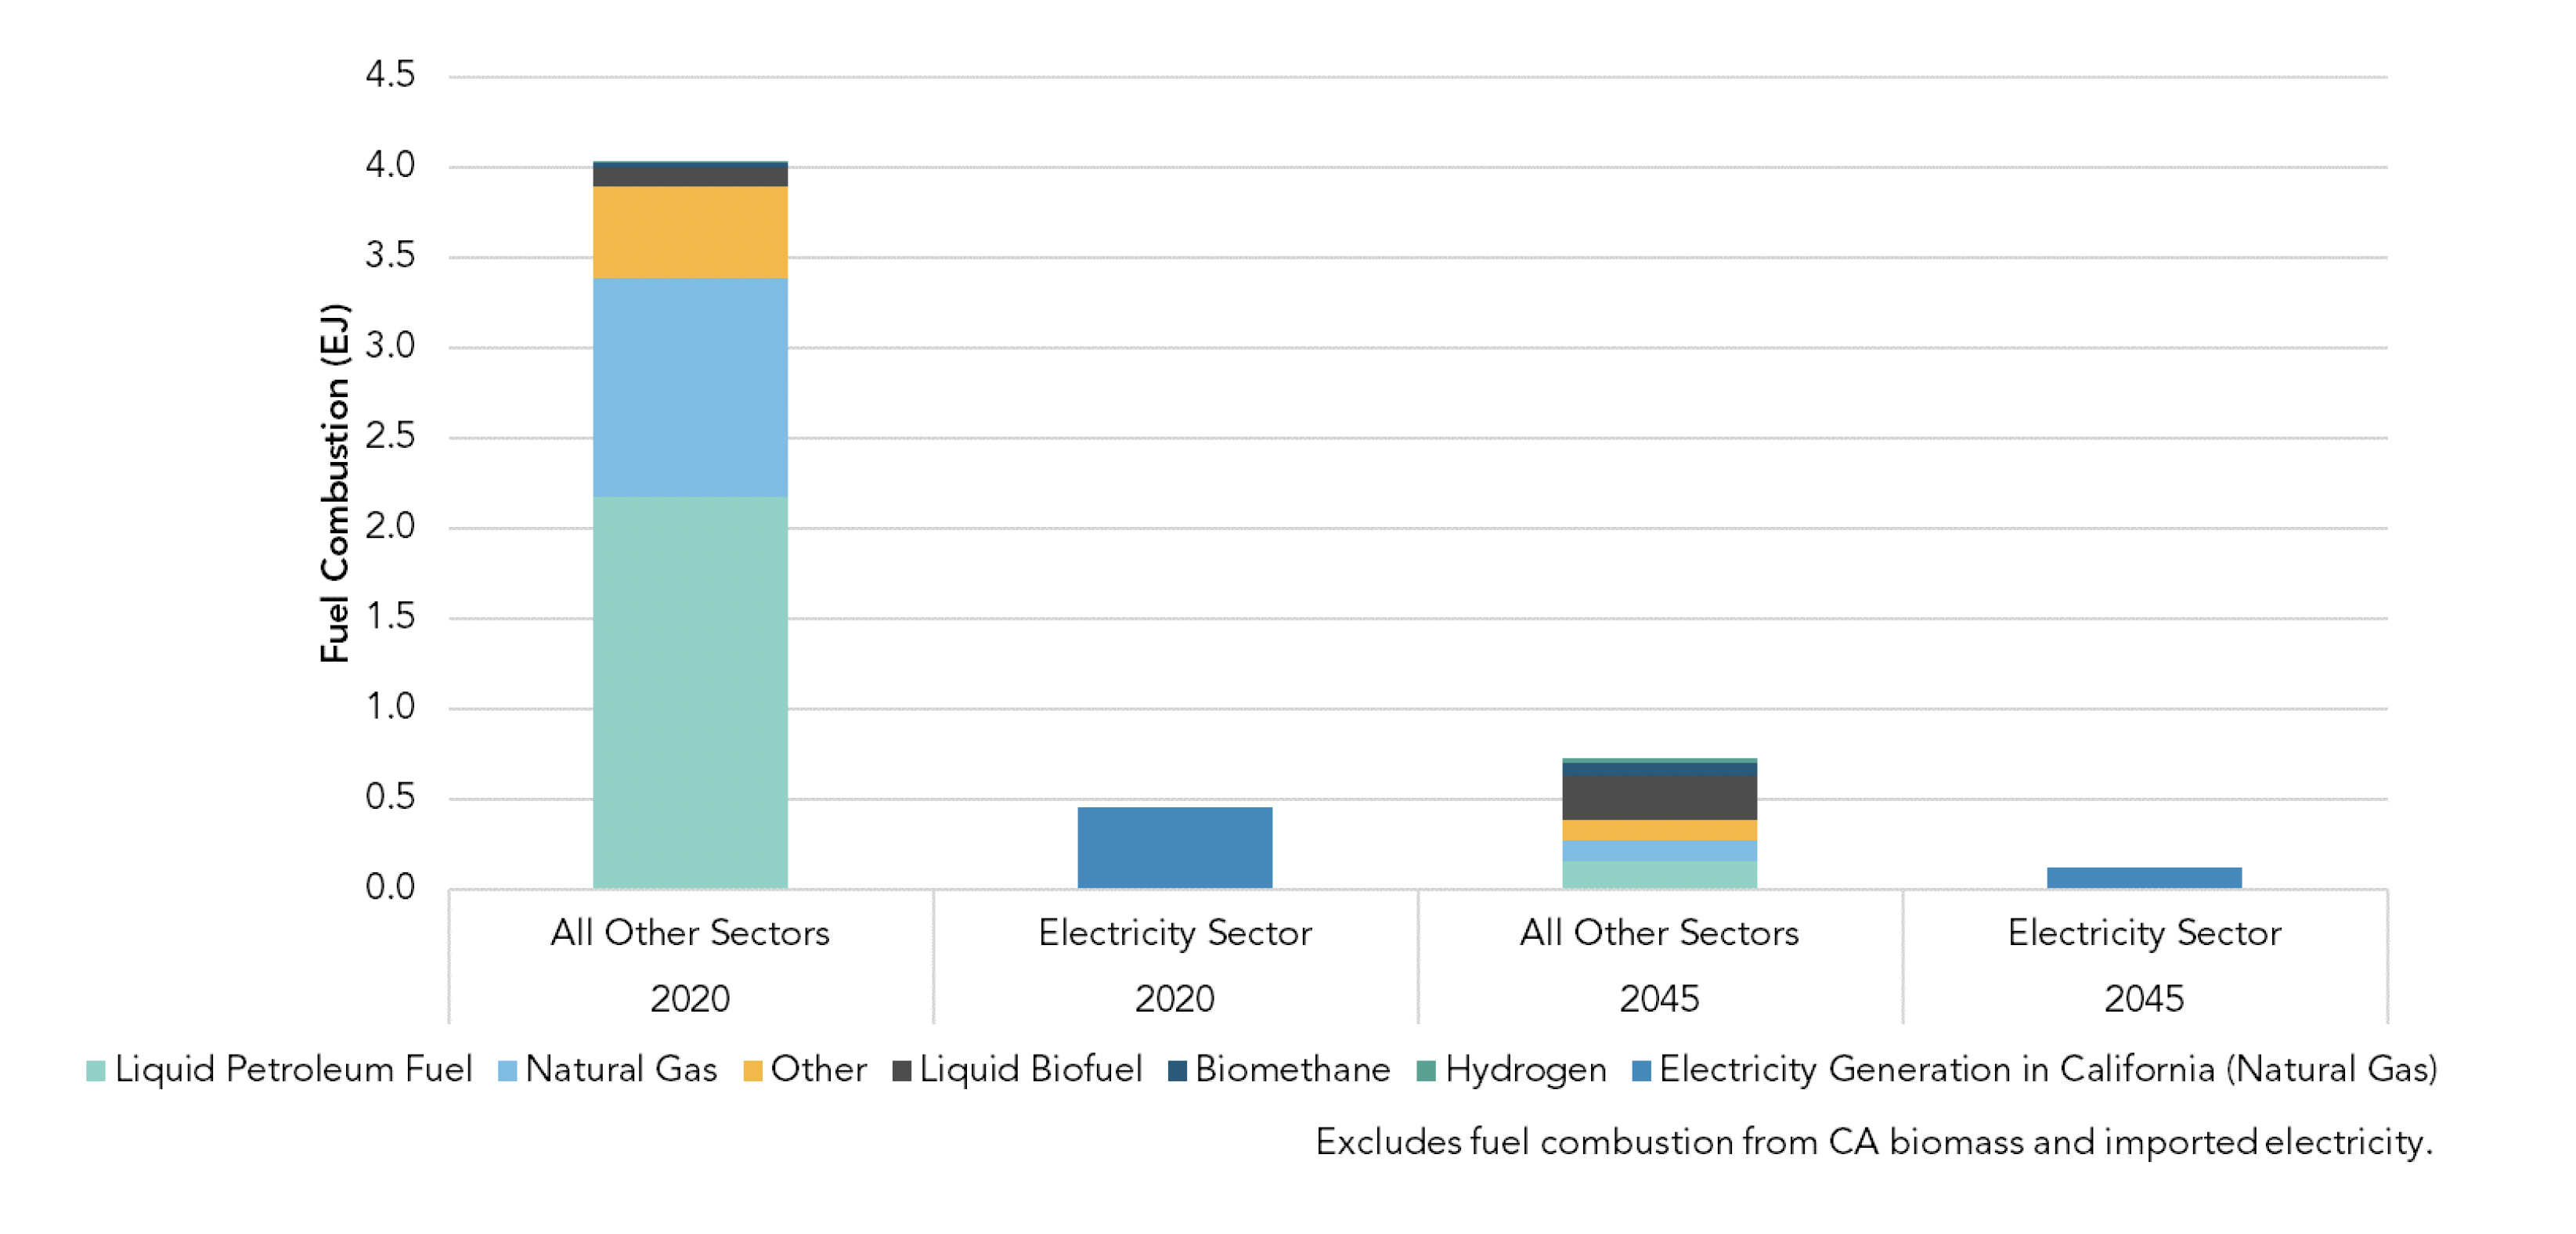 Stacked bar chart visualizing a proposed scenario: Fossil Fuel Combustion Declines Significantly across All Sectors